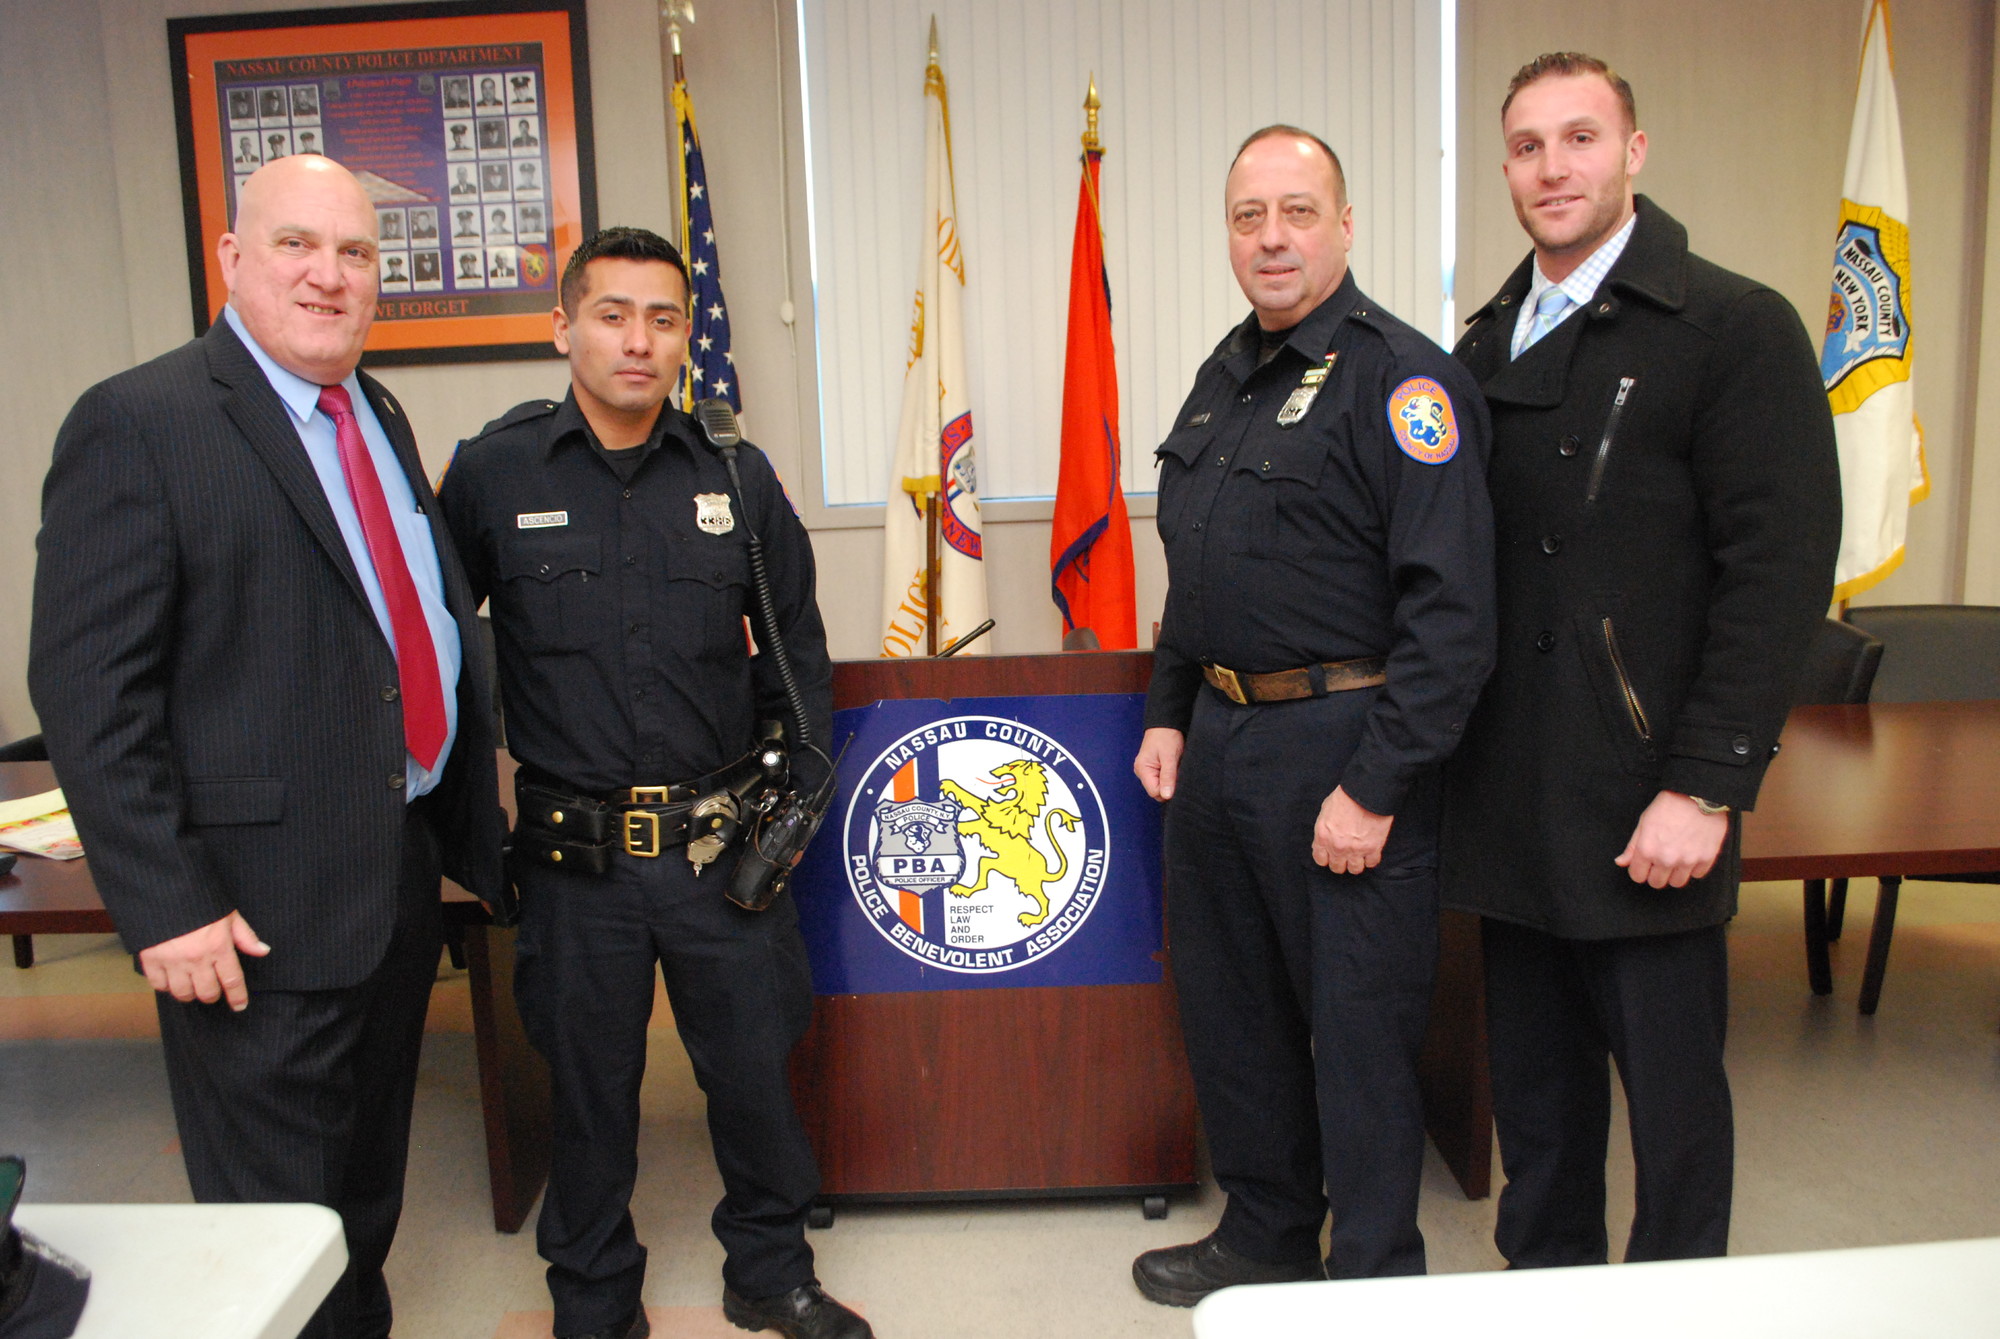 Jimmy Carver, president of the Police Benevolent Association, far left, congratulated 5th Precinct officers, Luis Ascenscio, James Schuerlein and Eban Marro, who helped rescue two people from a burning building in West Hempstad last Friday.